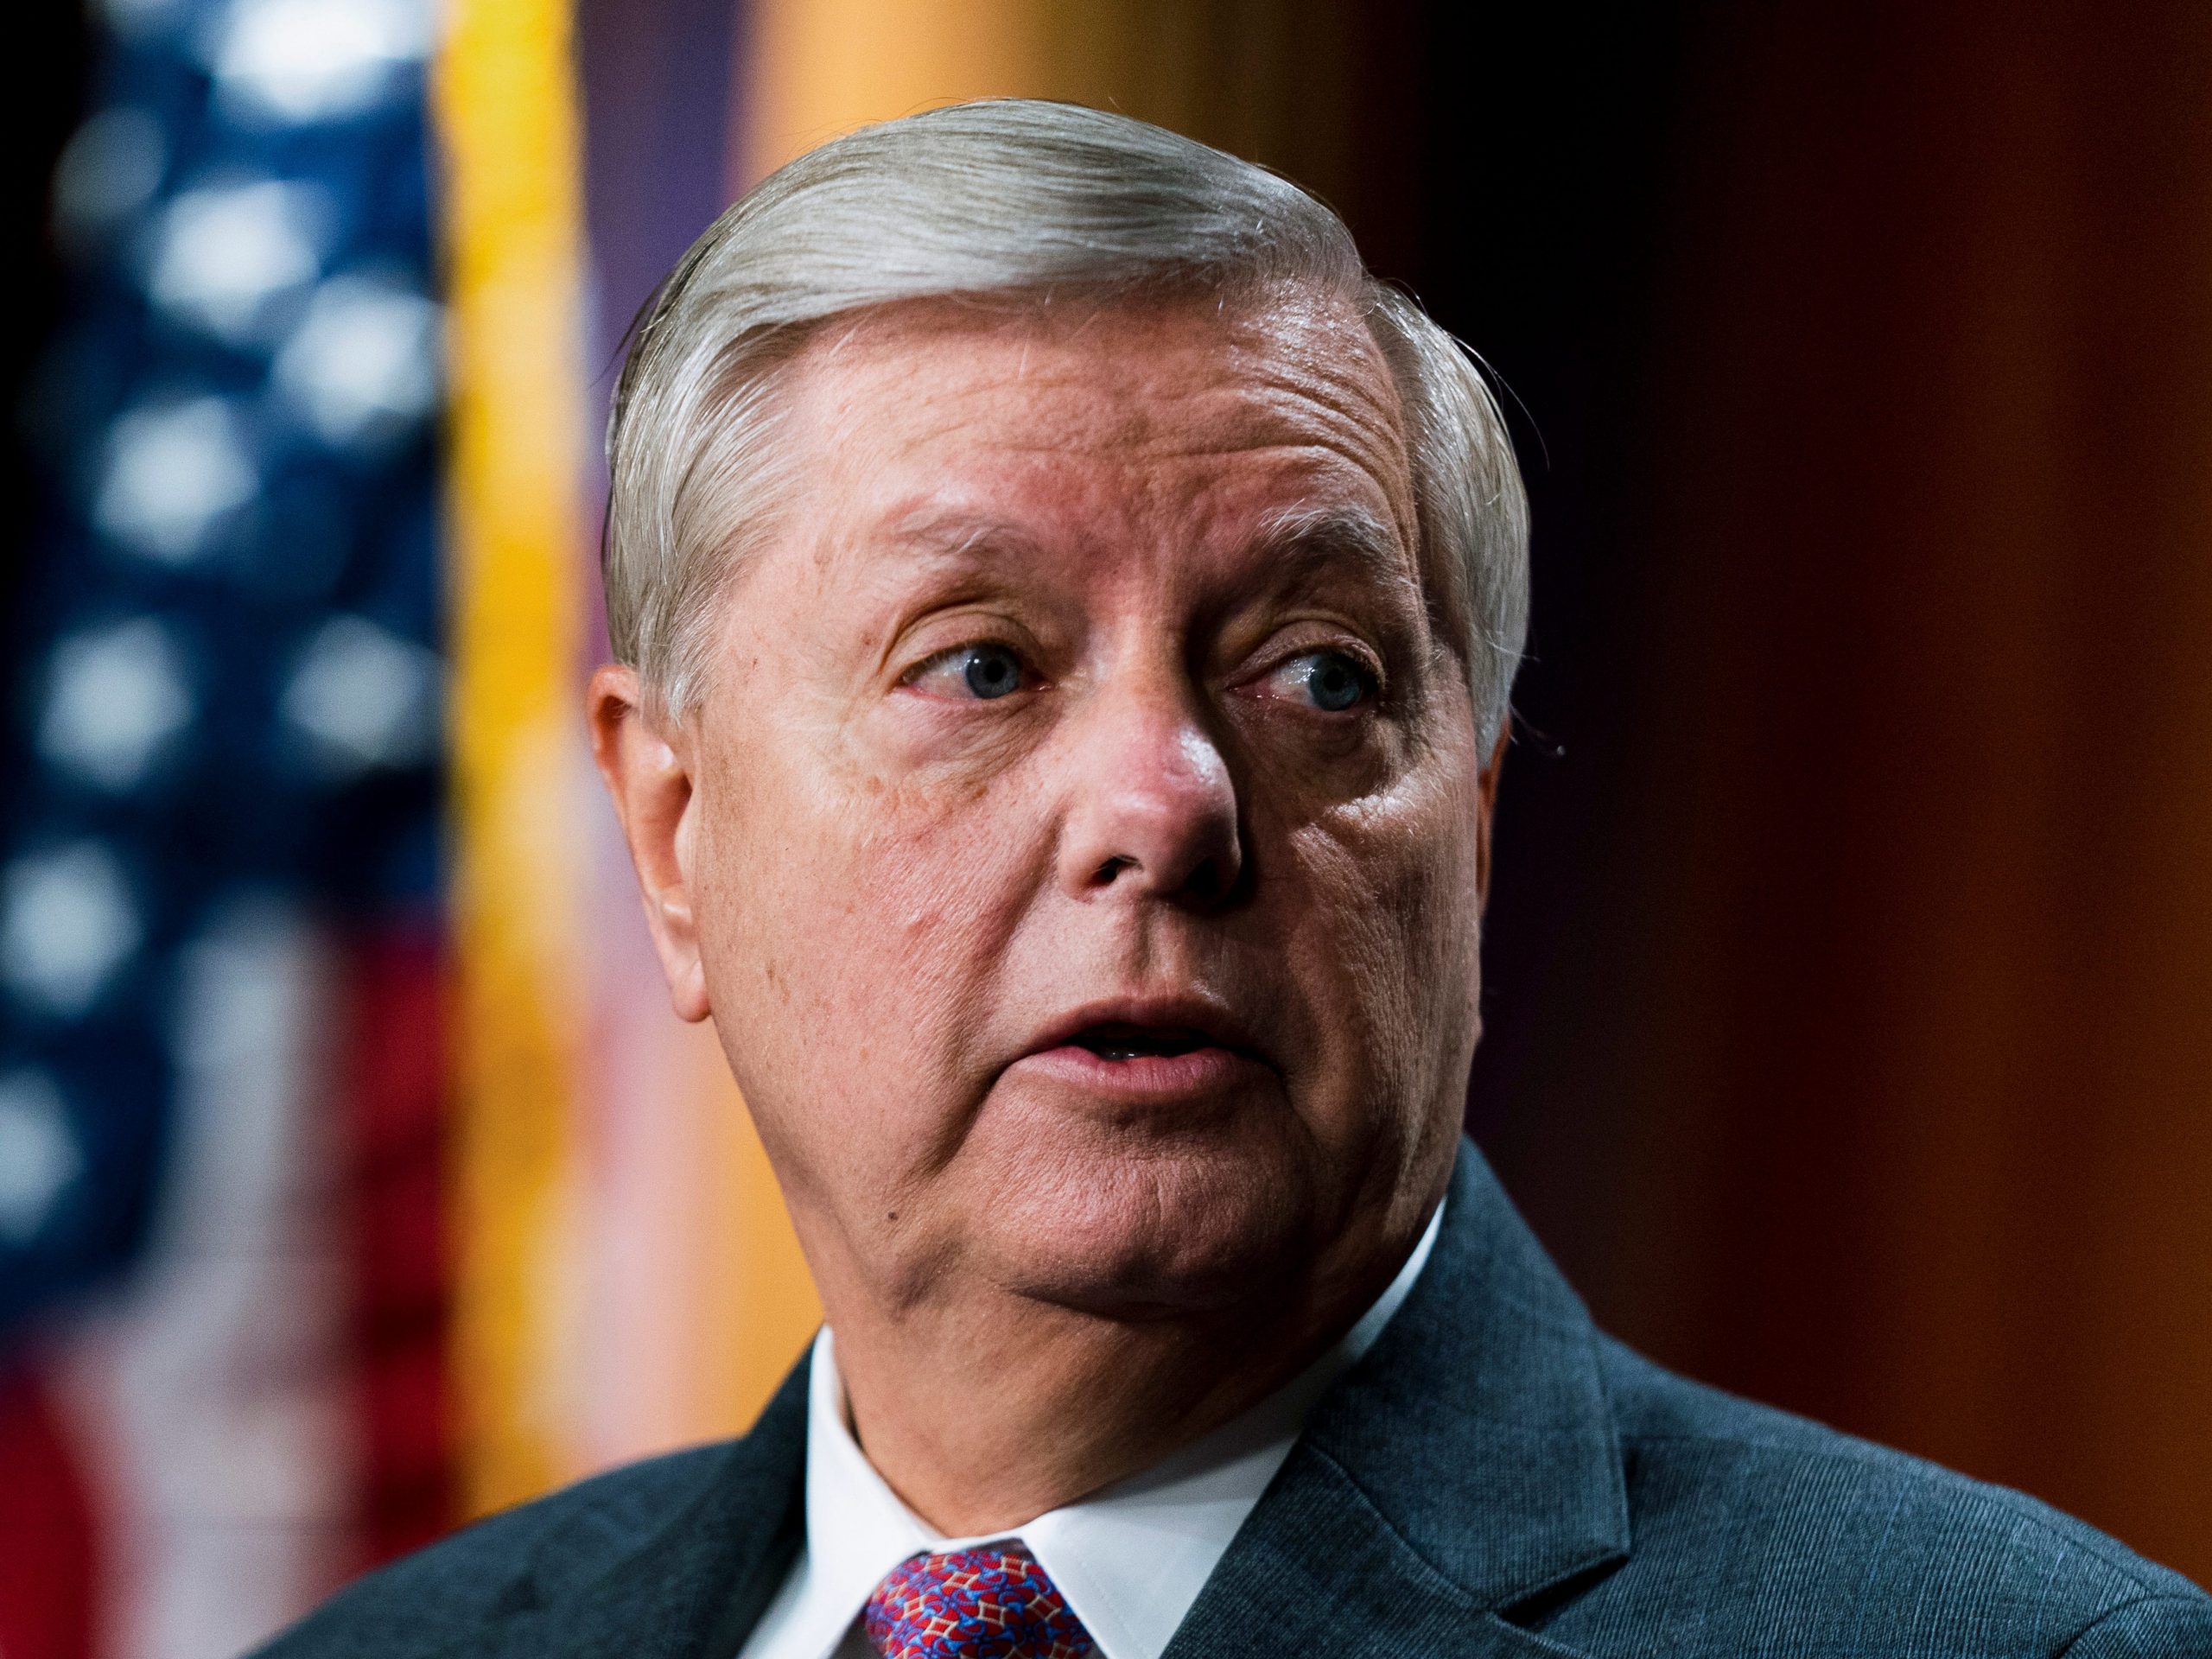 Lindsey Graham says Trump has a 'great chance' of being president again